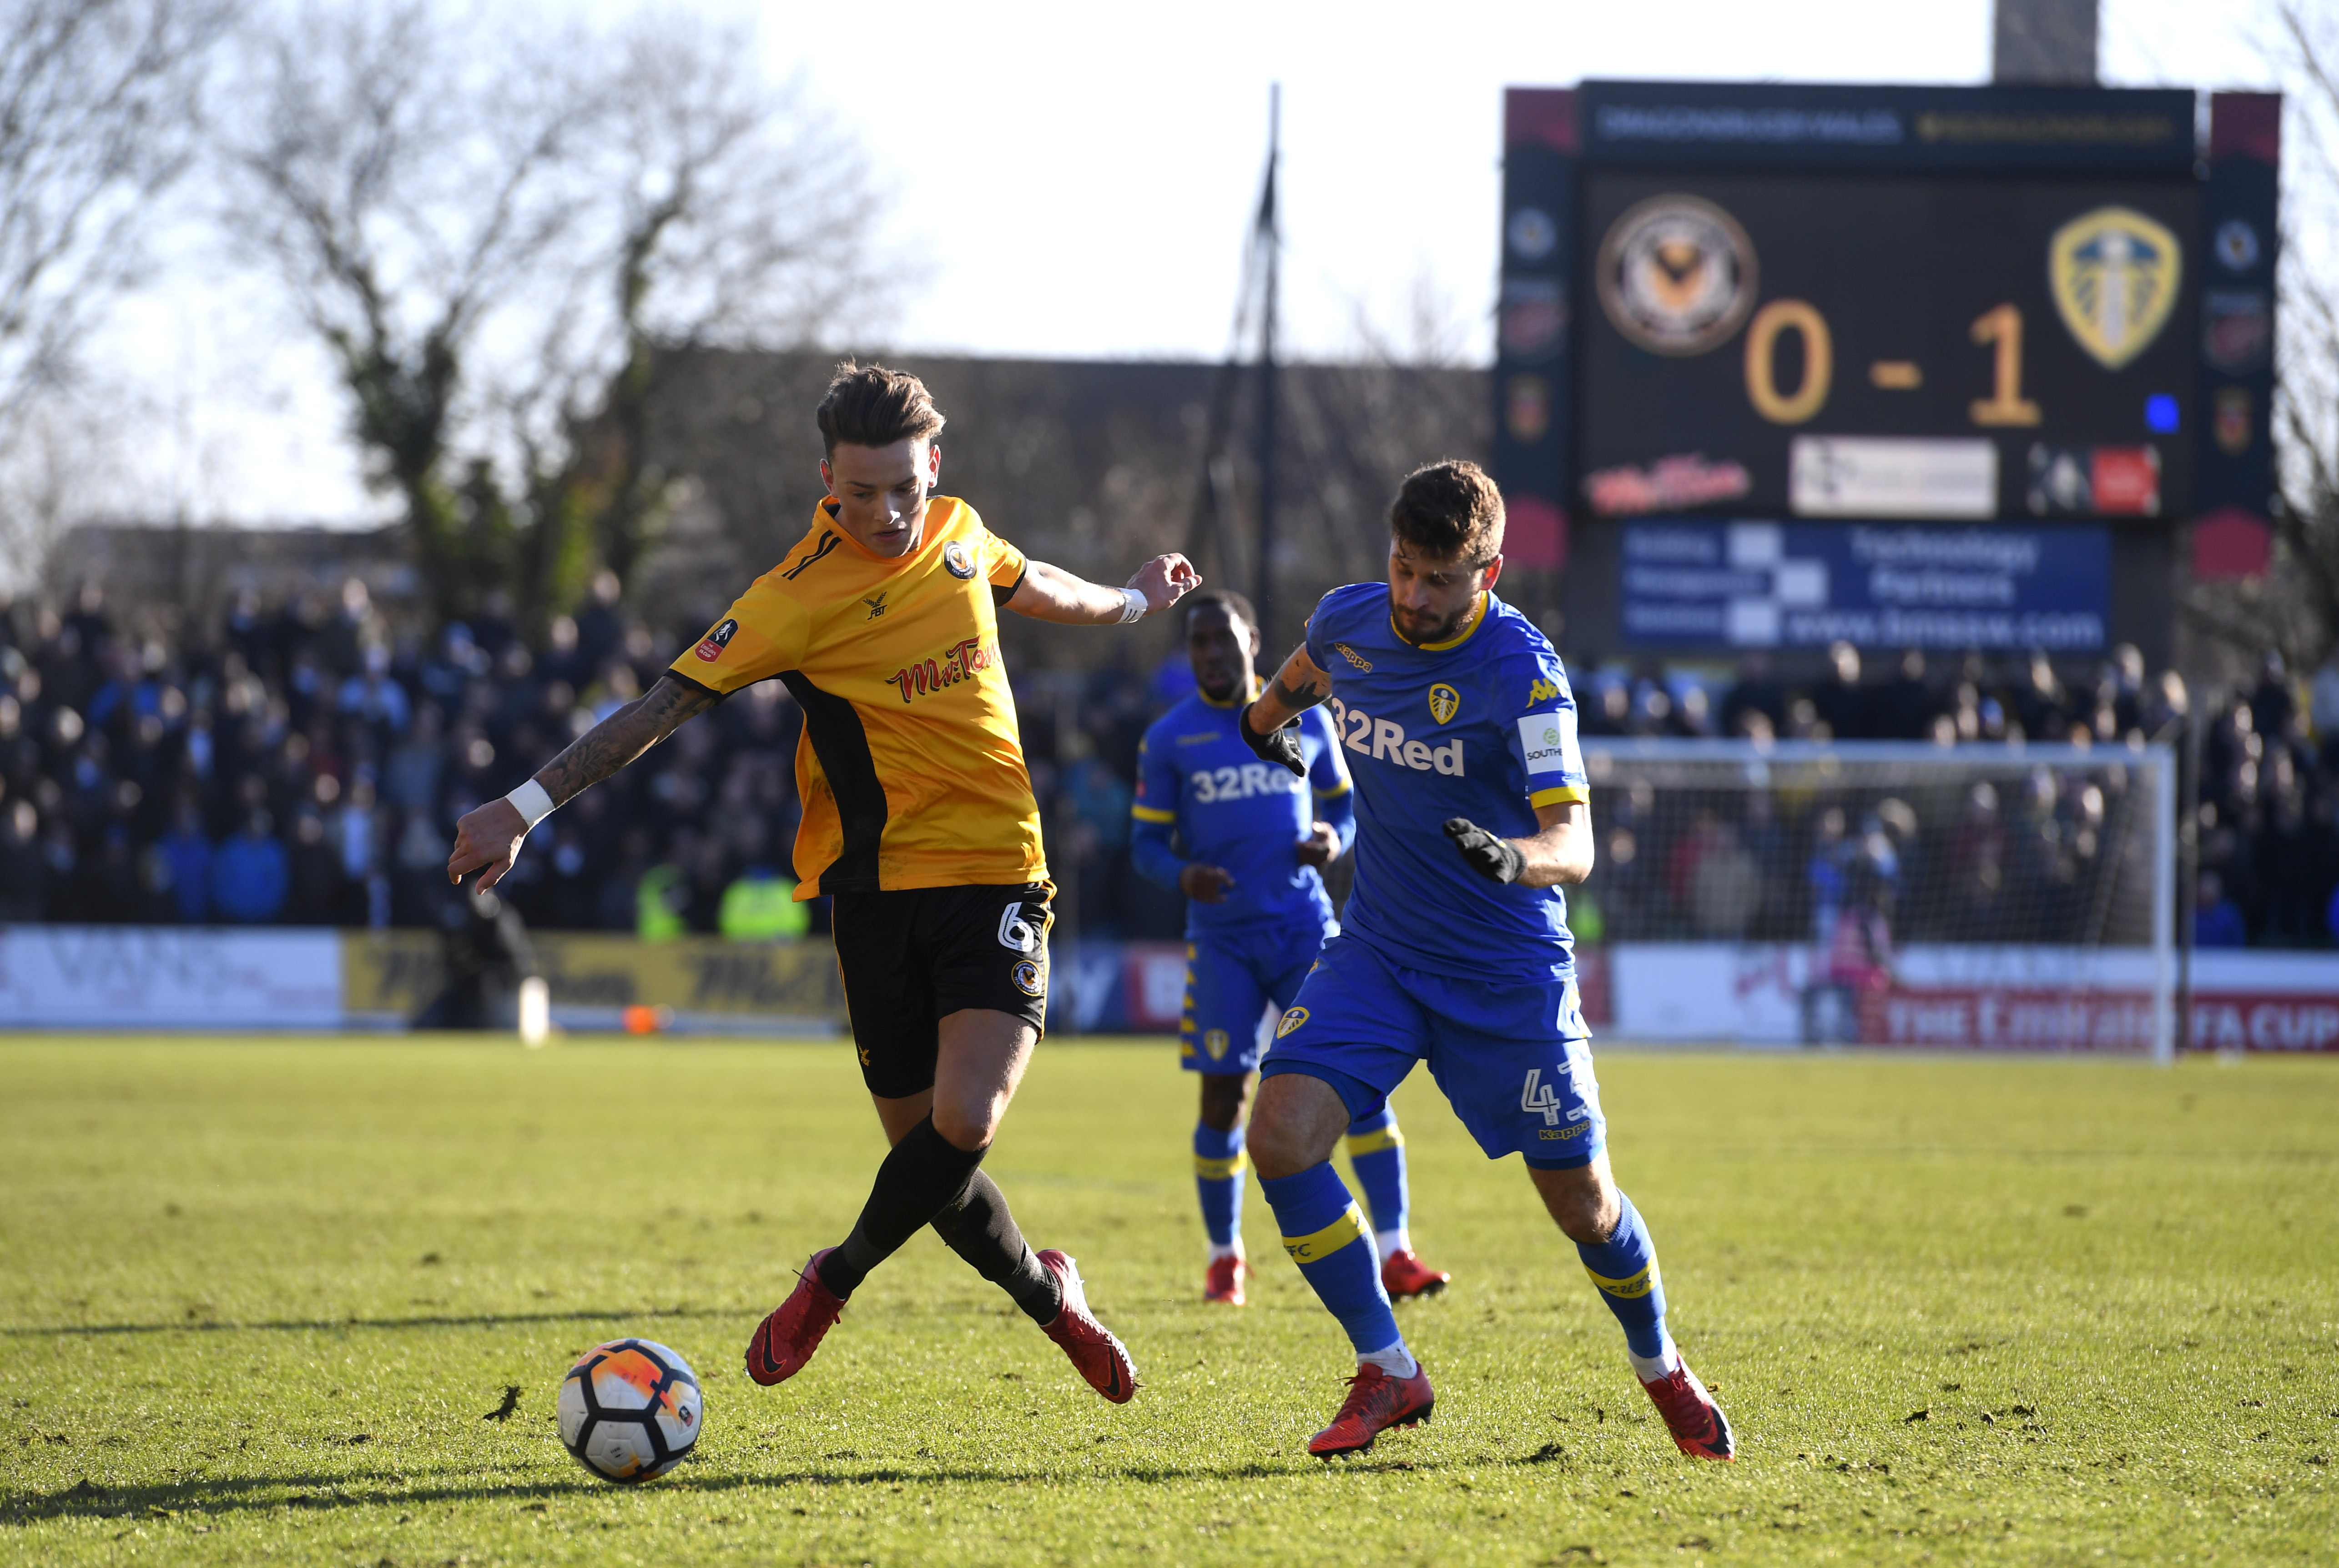 NEWPORT, WALES - JANUARY 07:  Ben White of Newport County and Mateusz Klich of Leeds United battle for the ball during The Emirates FA Cup Third Round match between Newport County and Leeds United at Rodney Parade on January 7, 2018 in Newport, Wales.  (Photo by Stu Forster/Getty Images)